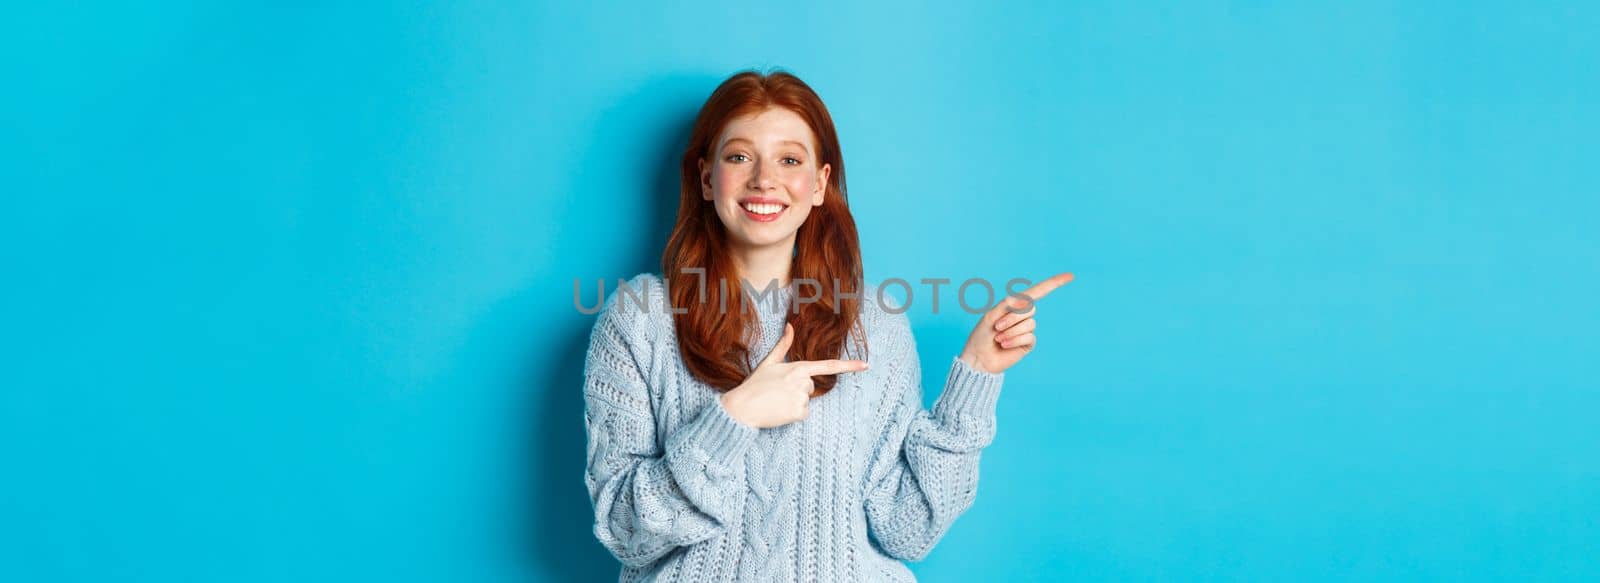 Cute teenager girl with red hair and freckles, pointing fingers left at logo and smiling, showing advertisement, standing over blue background.